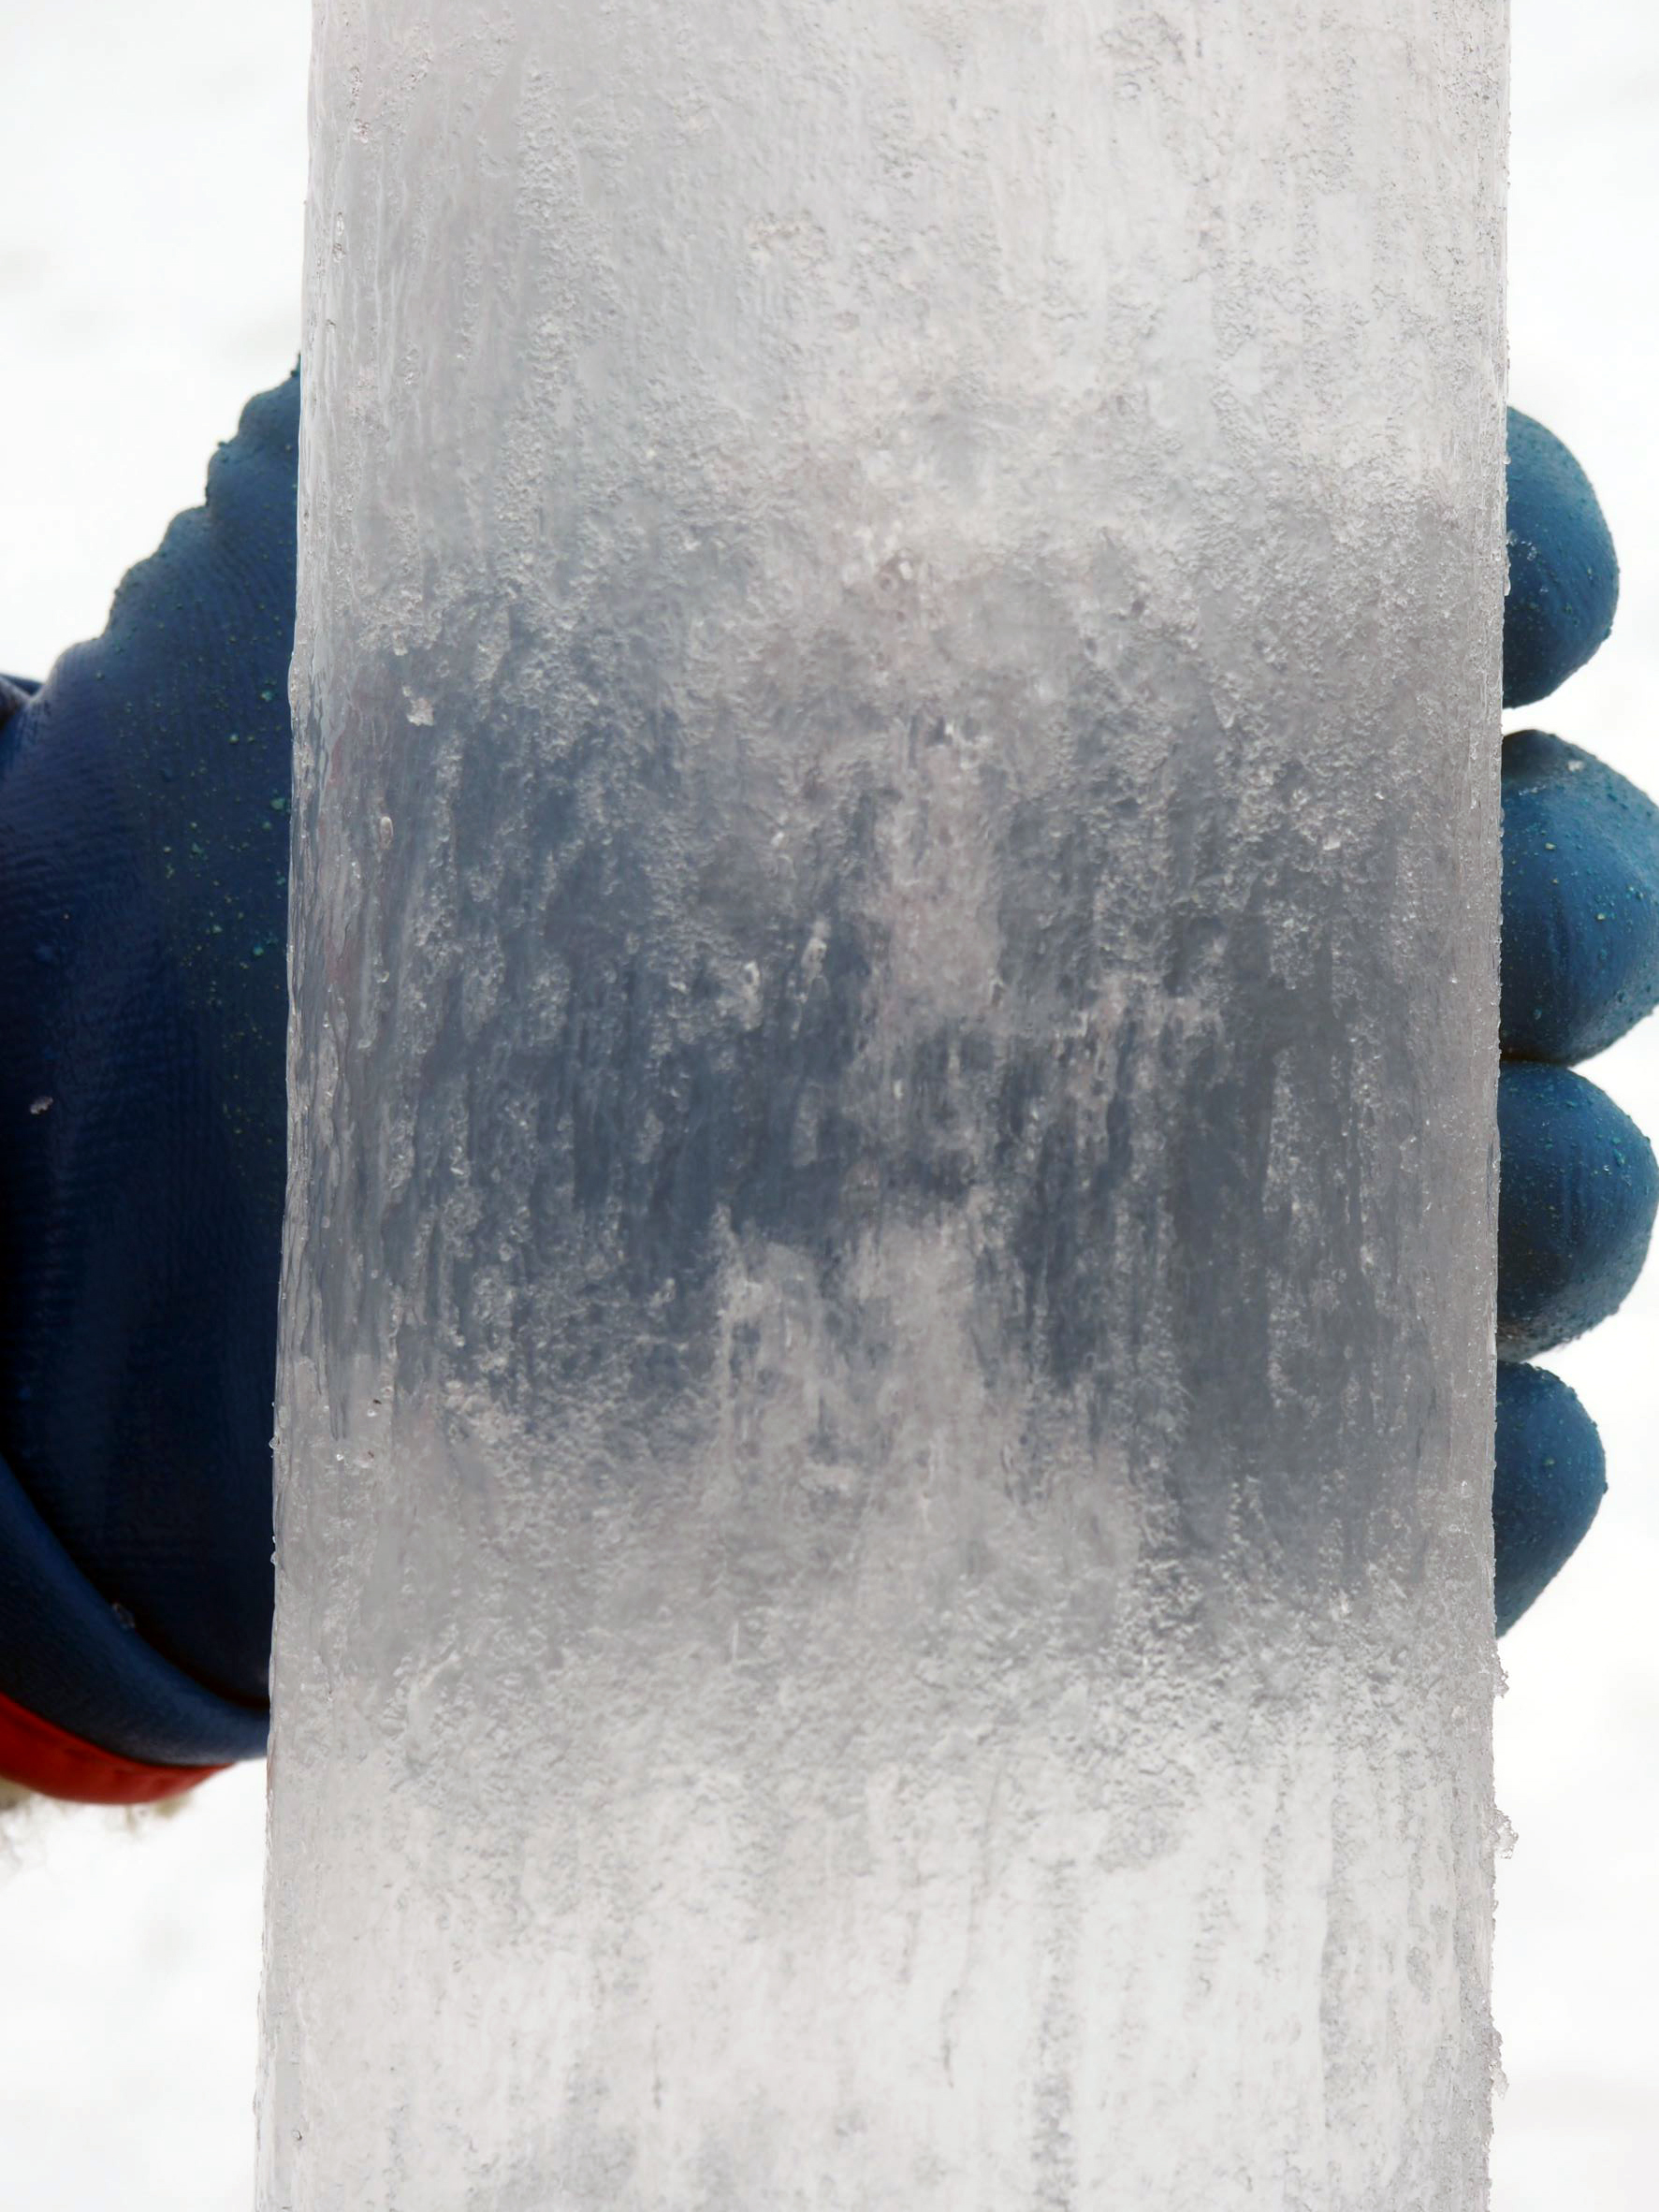 The brine channels in sea ice are especially visible in our ice station cores. (Photo: Helen Gemmrich)